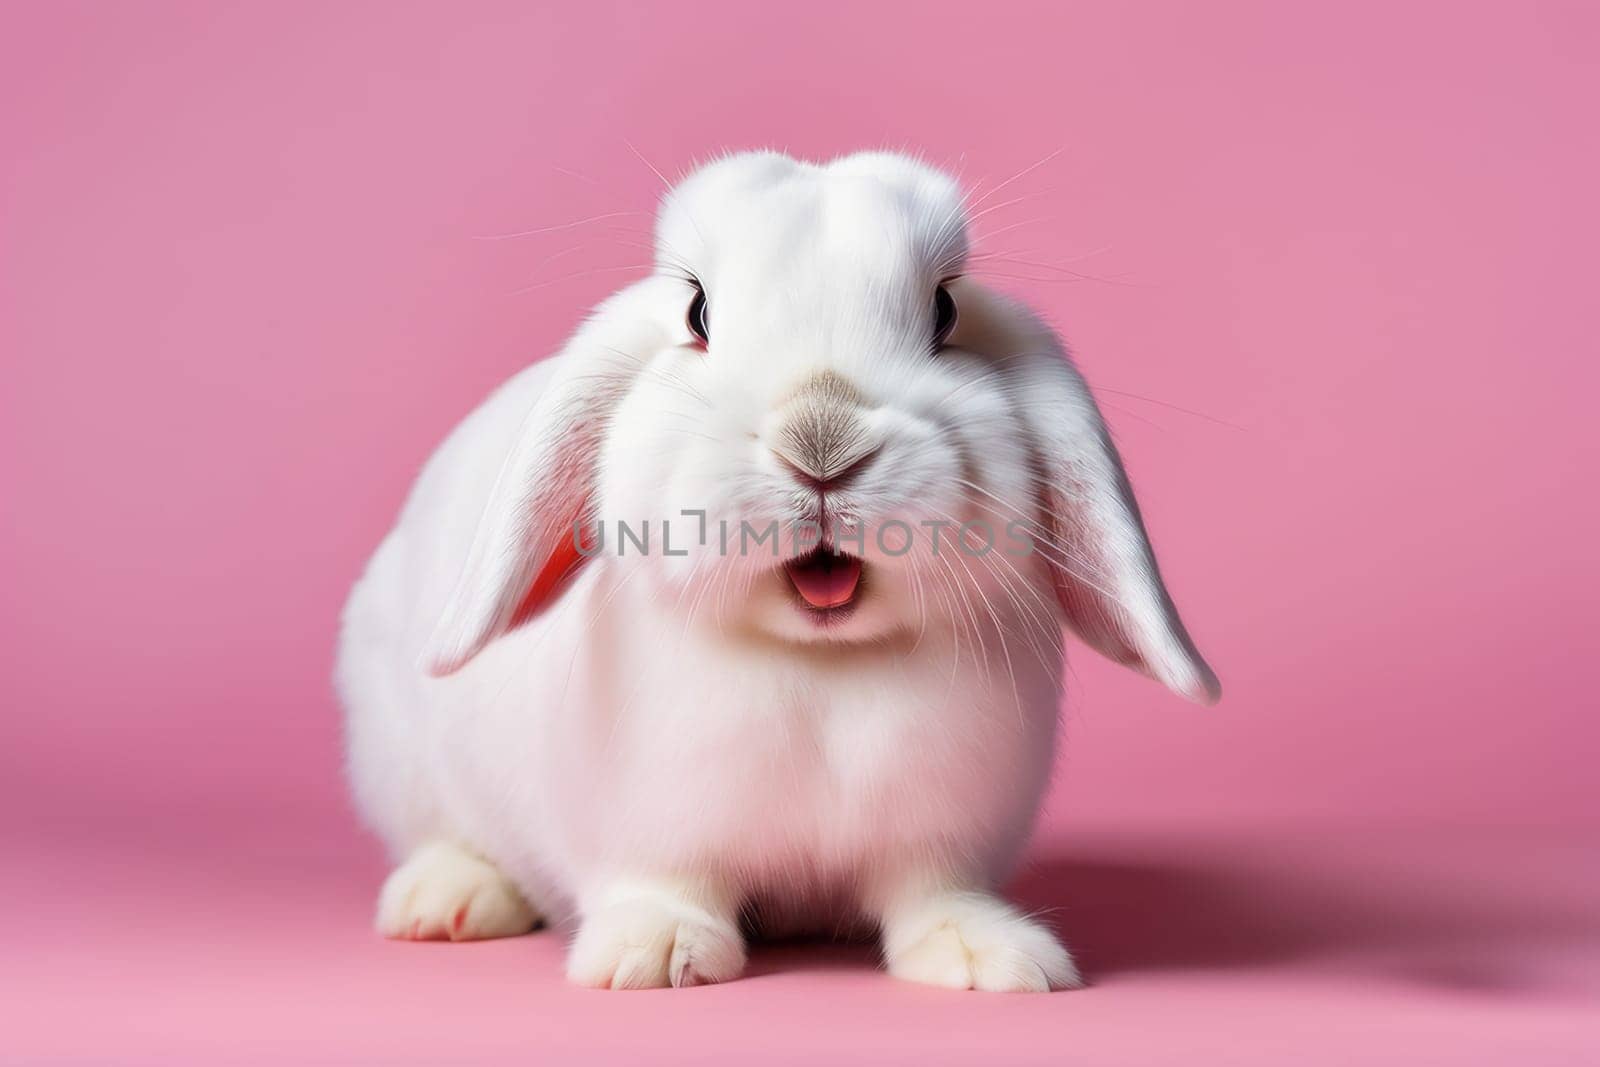 Front view of a white cute bunny standing on a pink background. A remarkable act by a young rabbit